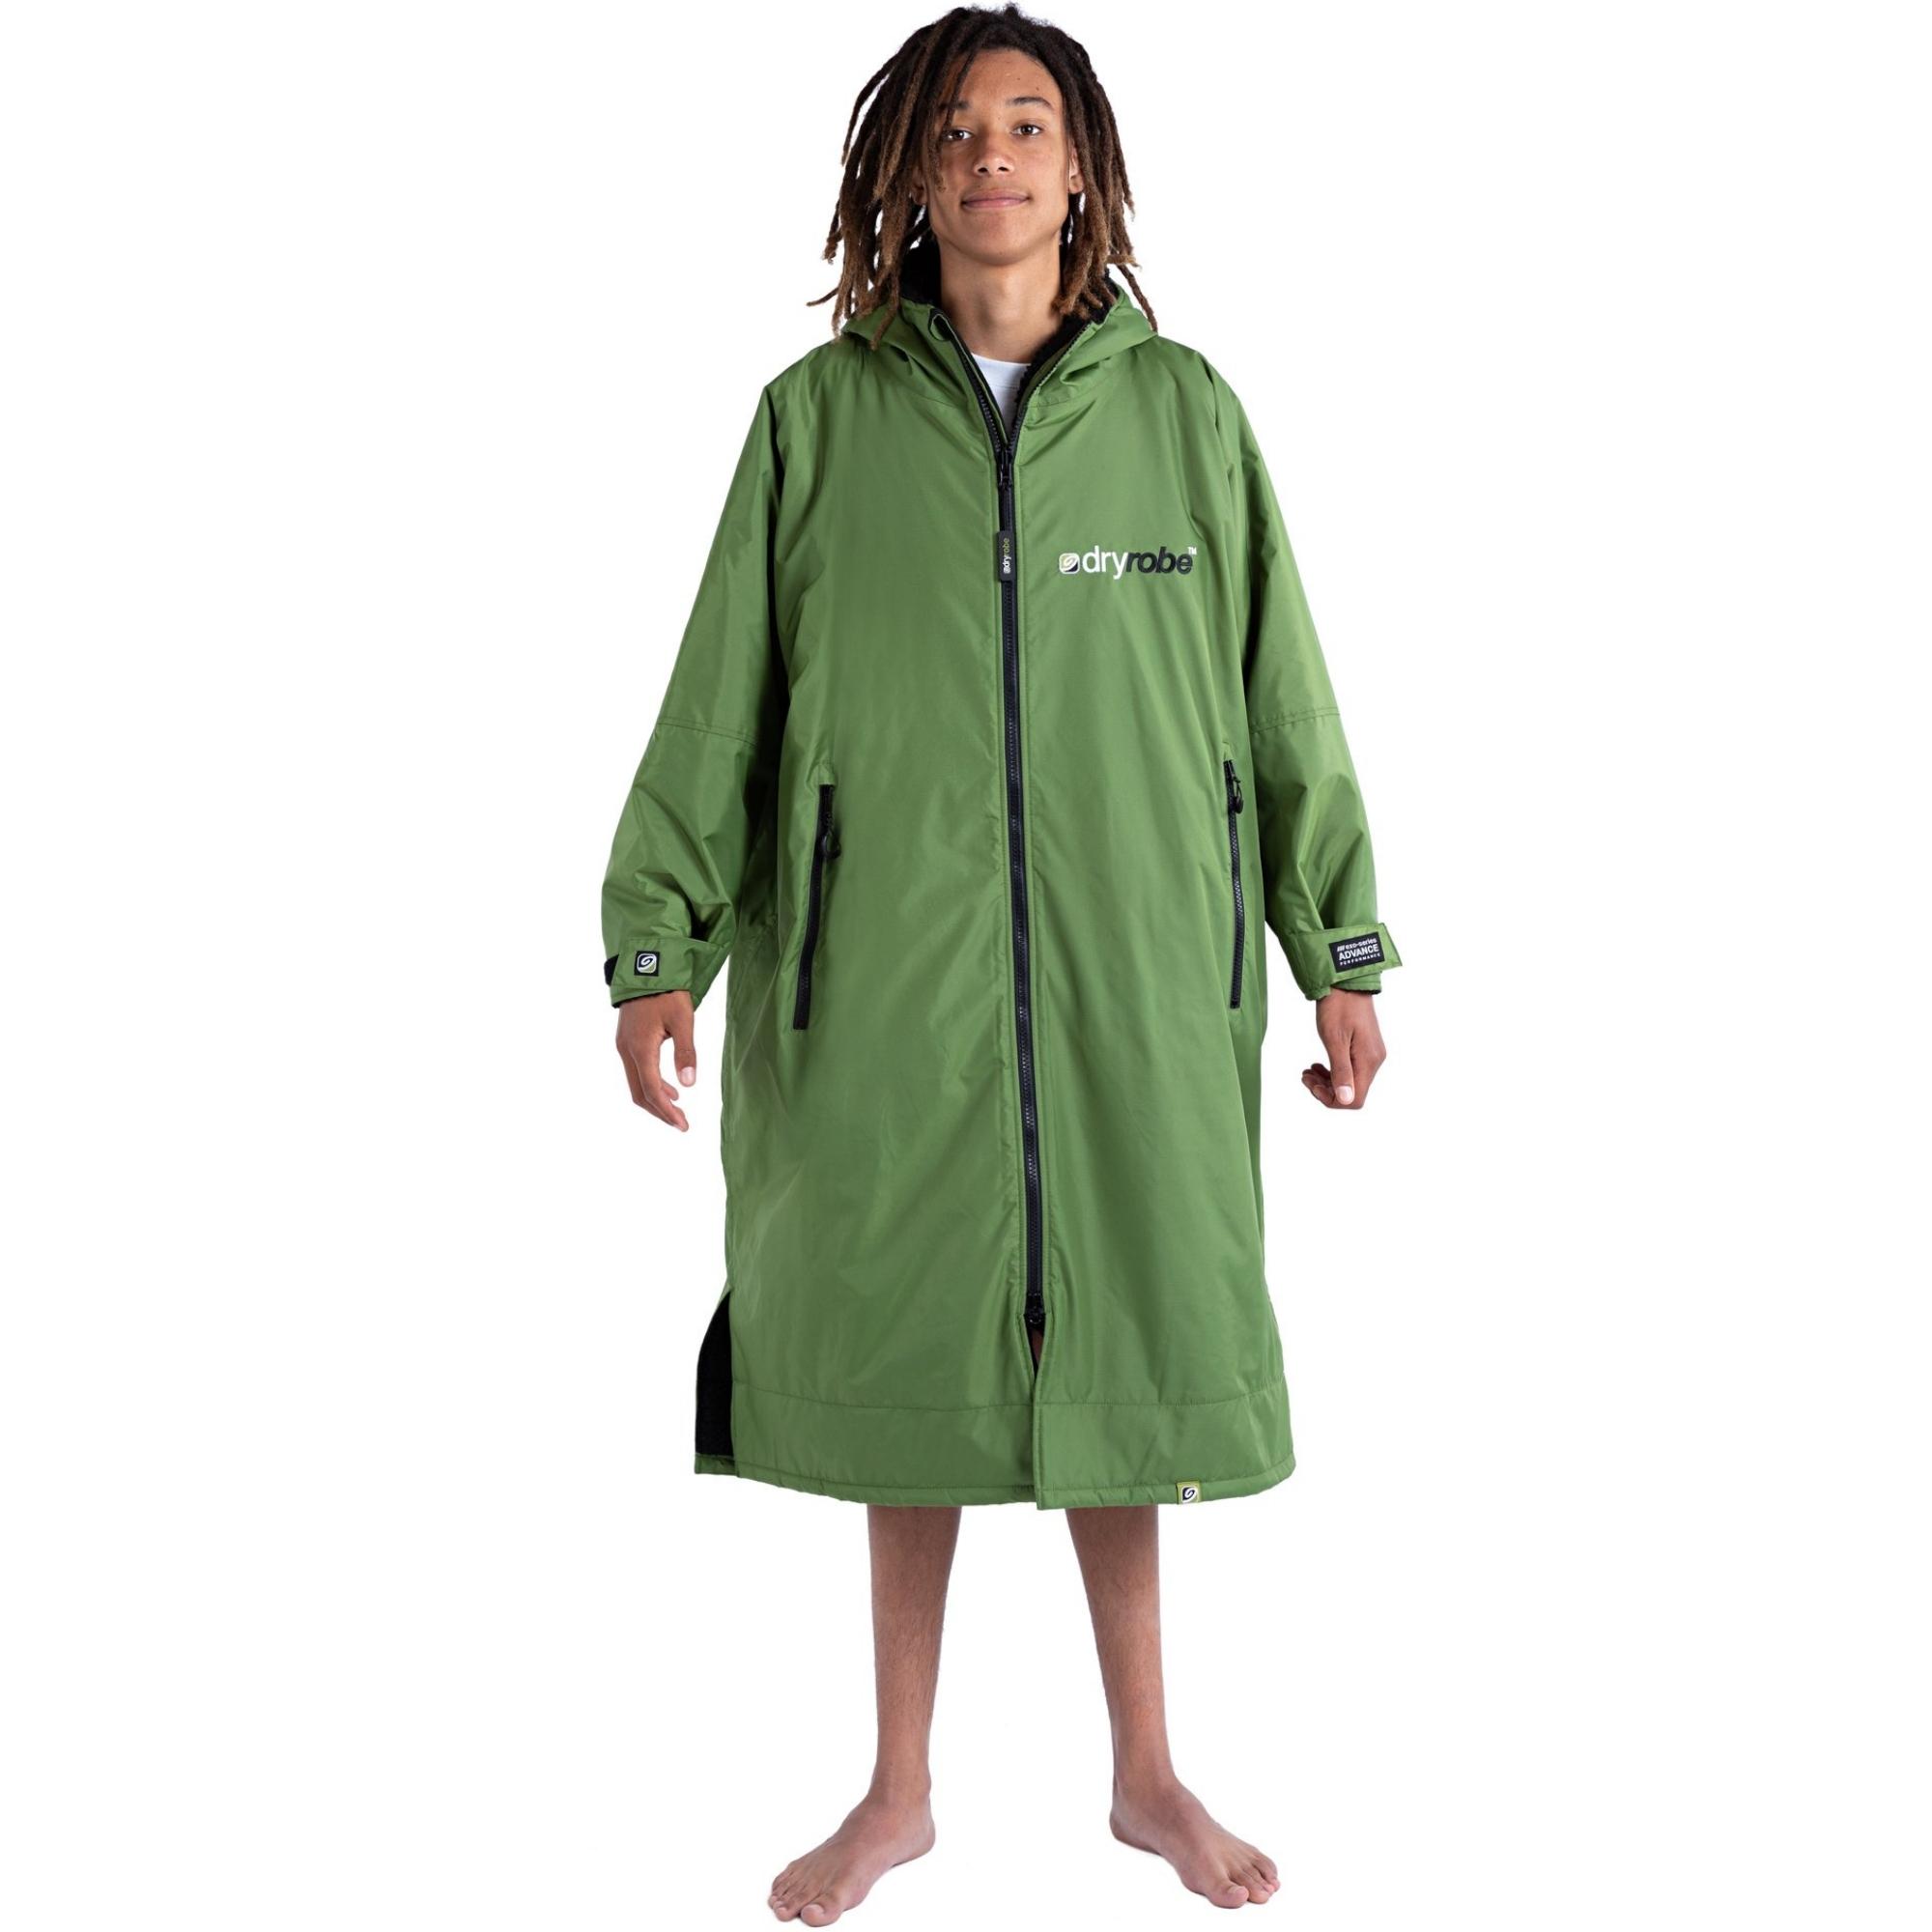 Dryrobe Advance Long Sleeve Drying & Changing Robe - Forest Green/Black - Changing Robe Poncho Towel by Dryrobe